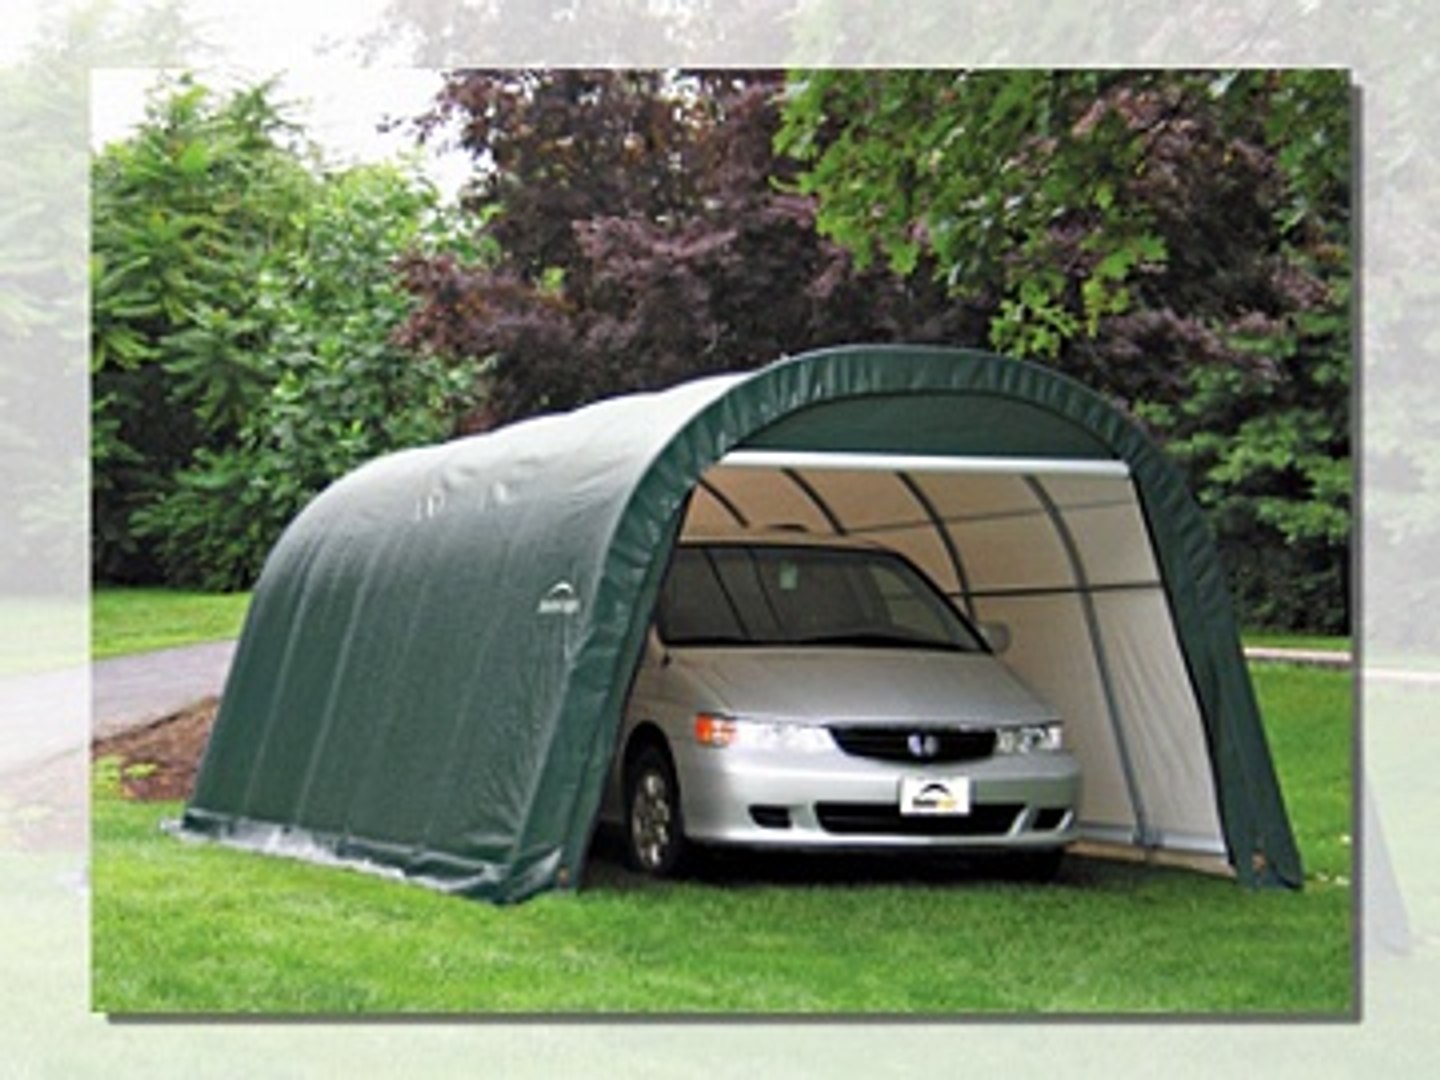 Portable Car Garage Costco Brand Shelter Covers - video Dailymotion